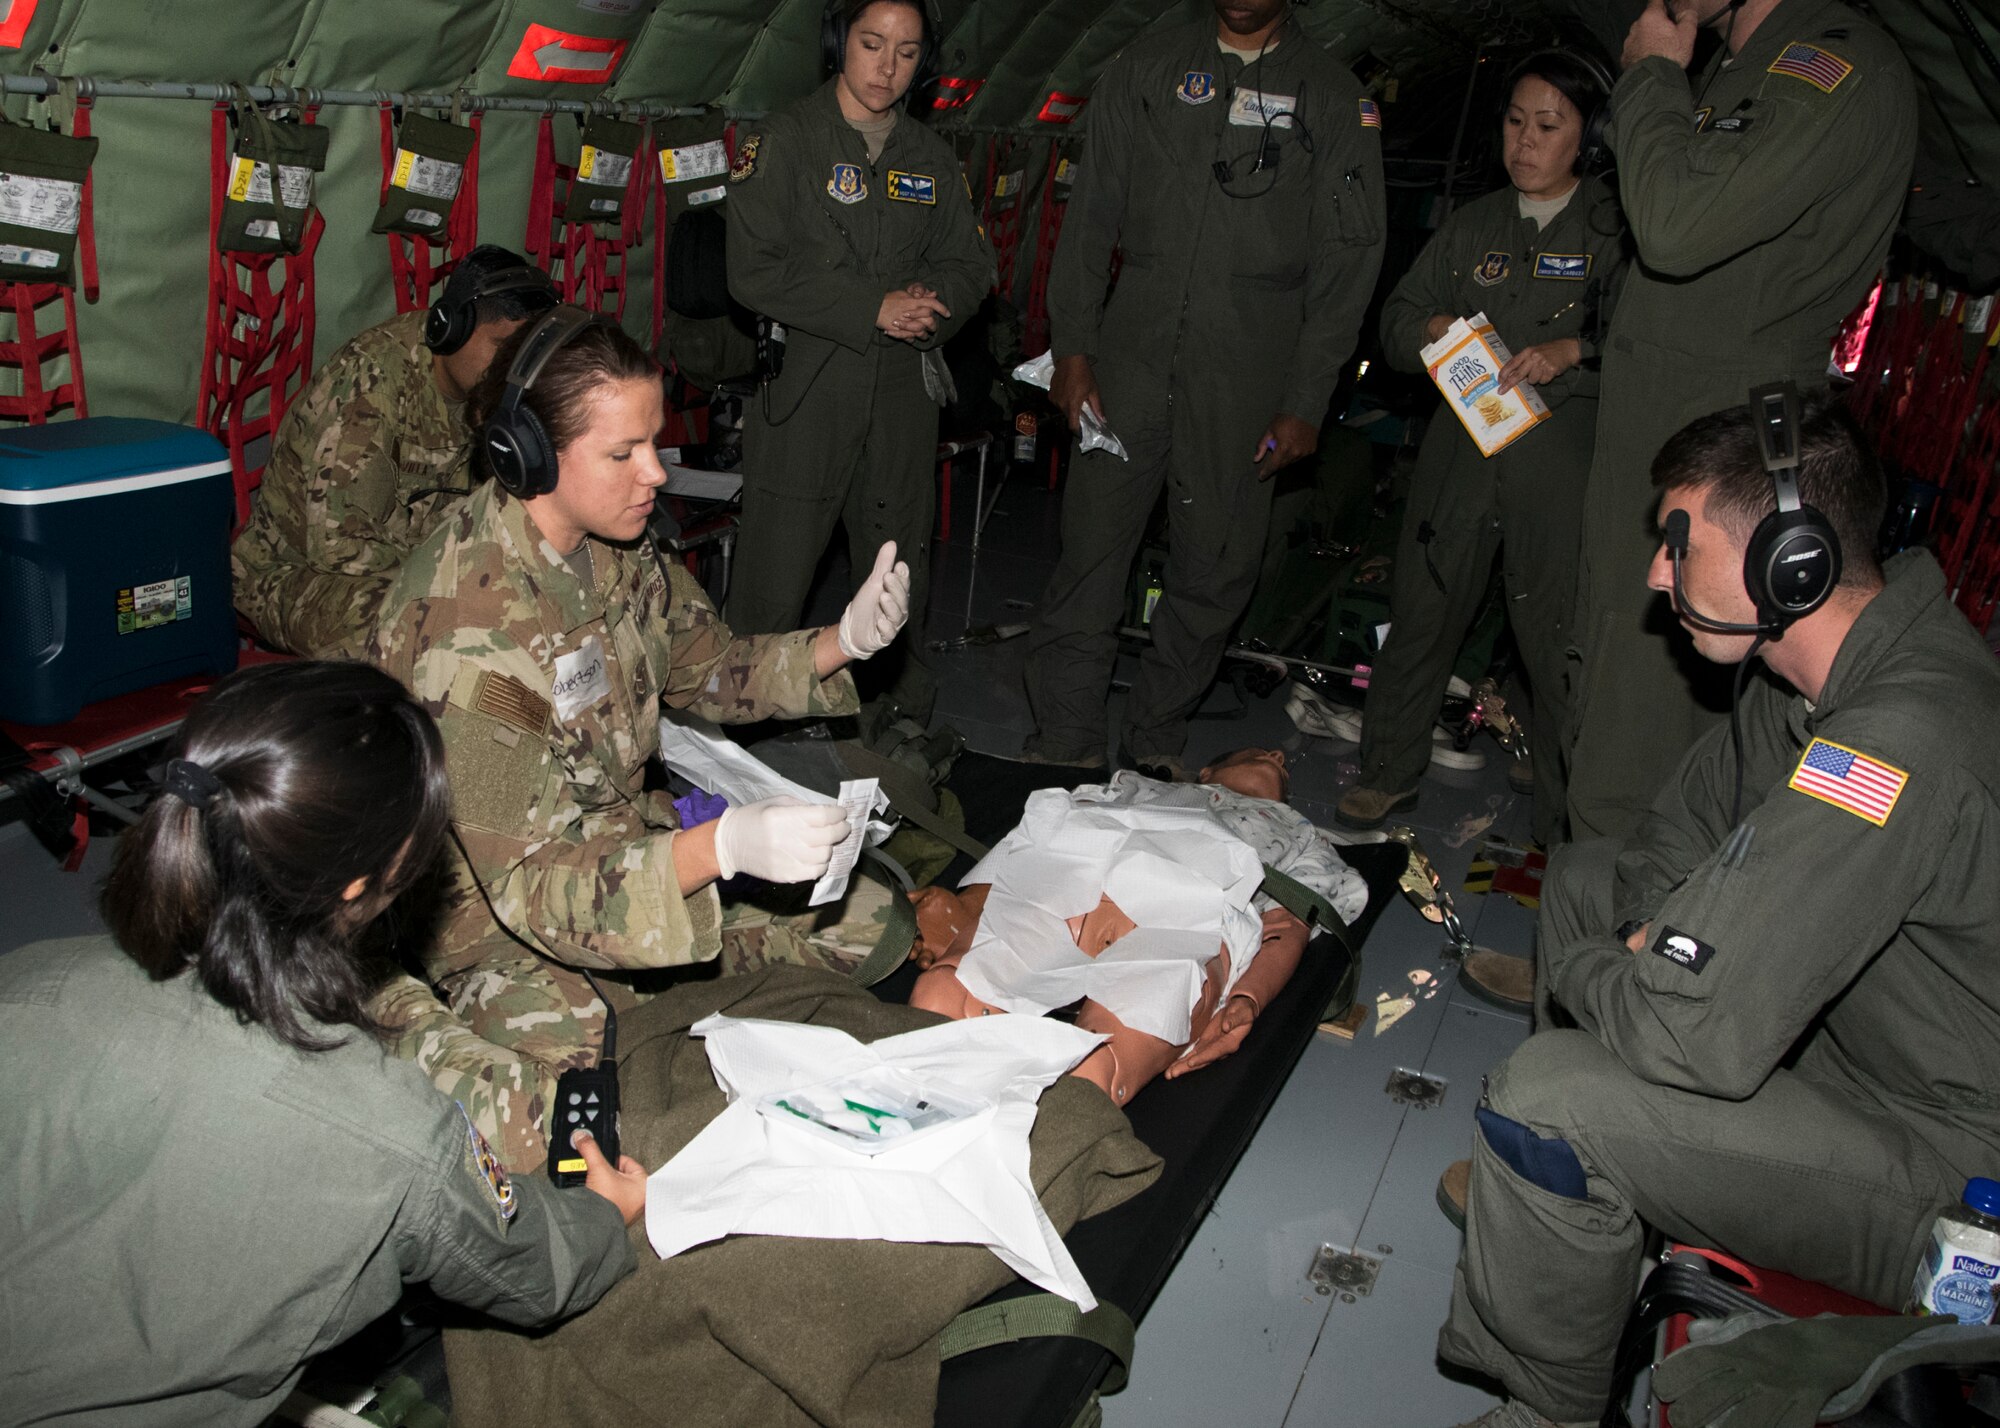 Staff Sgt. Sarah Loudon, 459th Aeromedical Evacuation Squadron flight medic, demonstrates an indwelling foley catheter, to team members during an off station trainer on a KC-135 Stratotanker, Sept. 20, 2019. The team participates in local and off station training missions about twice a month to ensure humanitarian and deployment mission readiness. (U.S. Air Force photo by Staff Sgt. Cierra Presentado/Released)